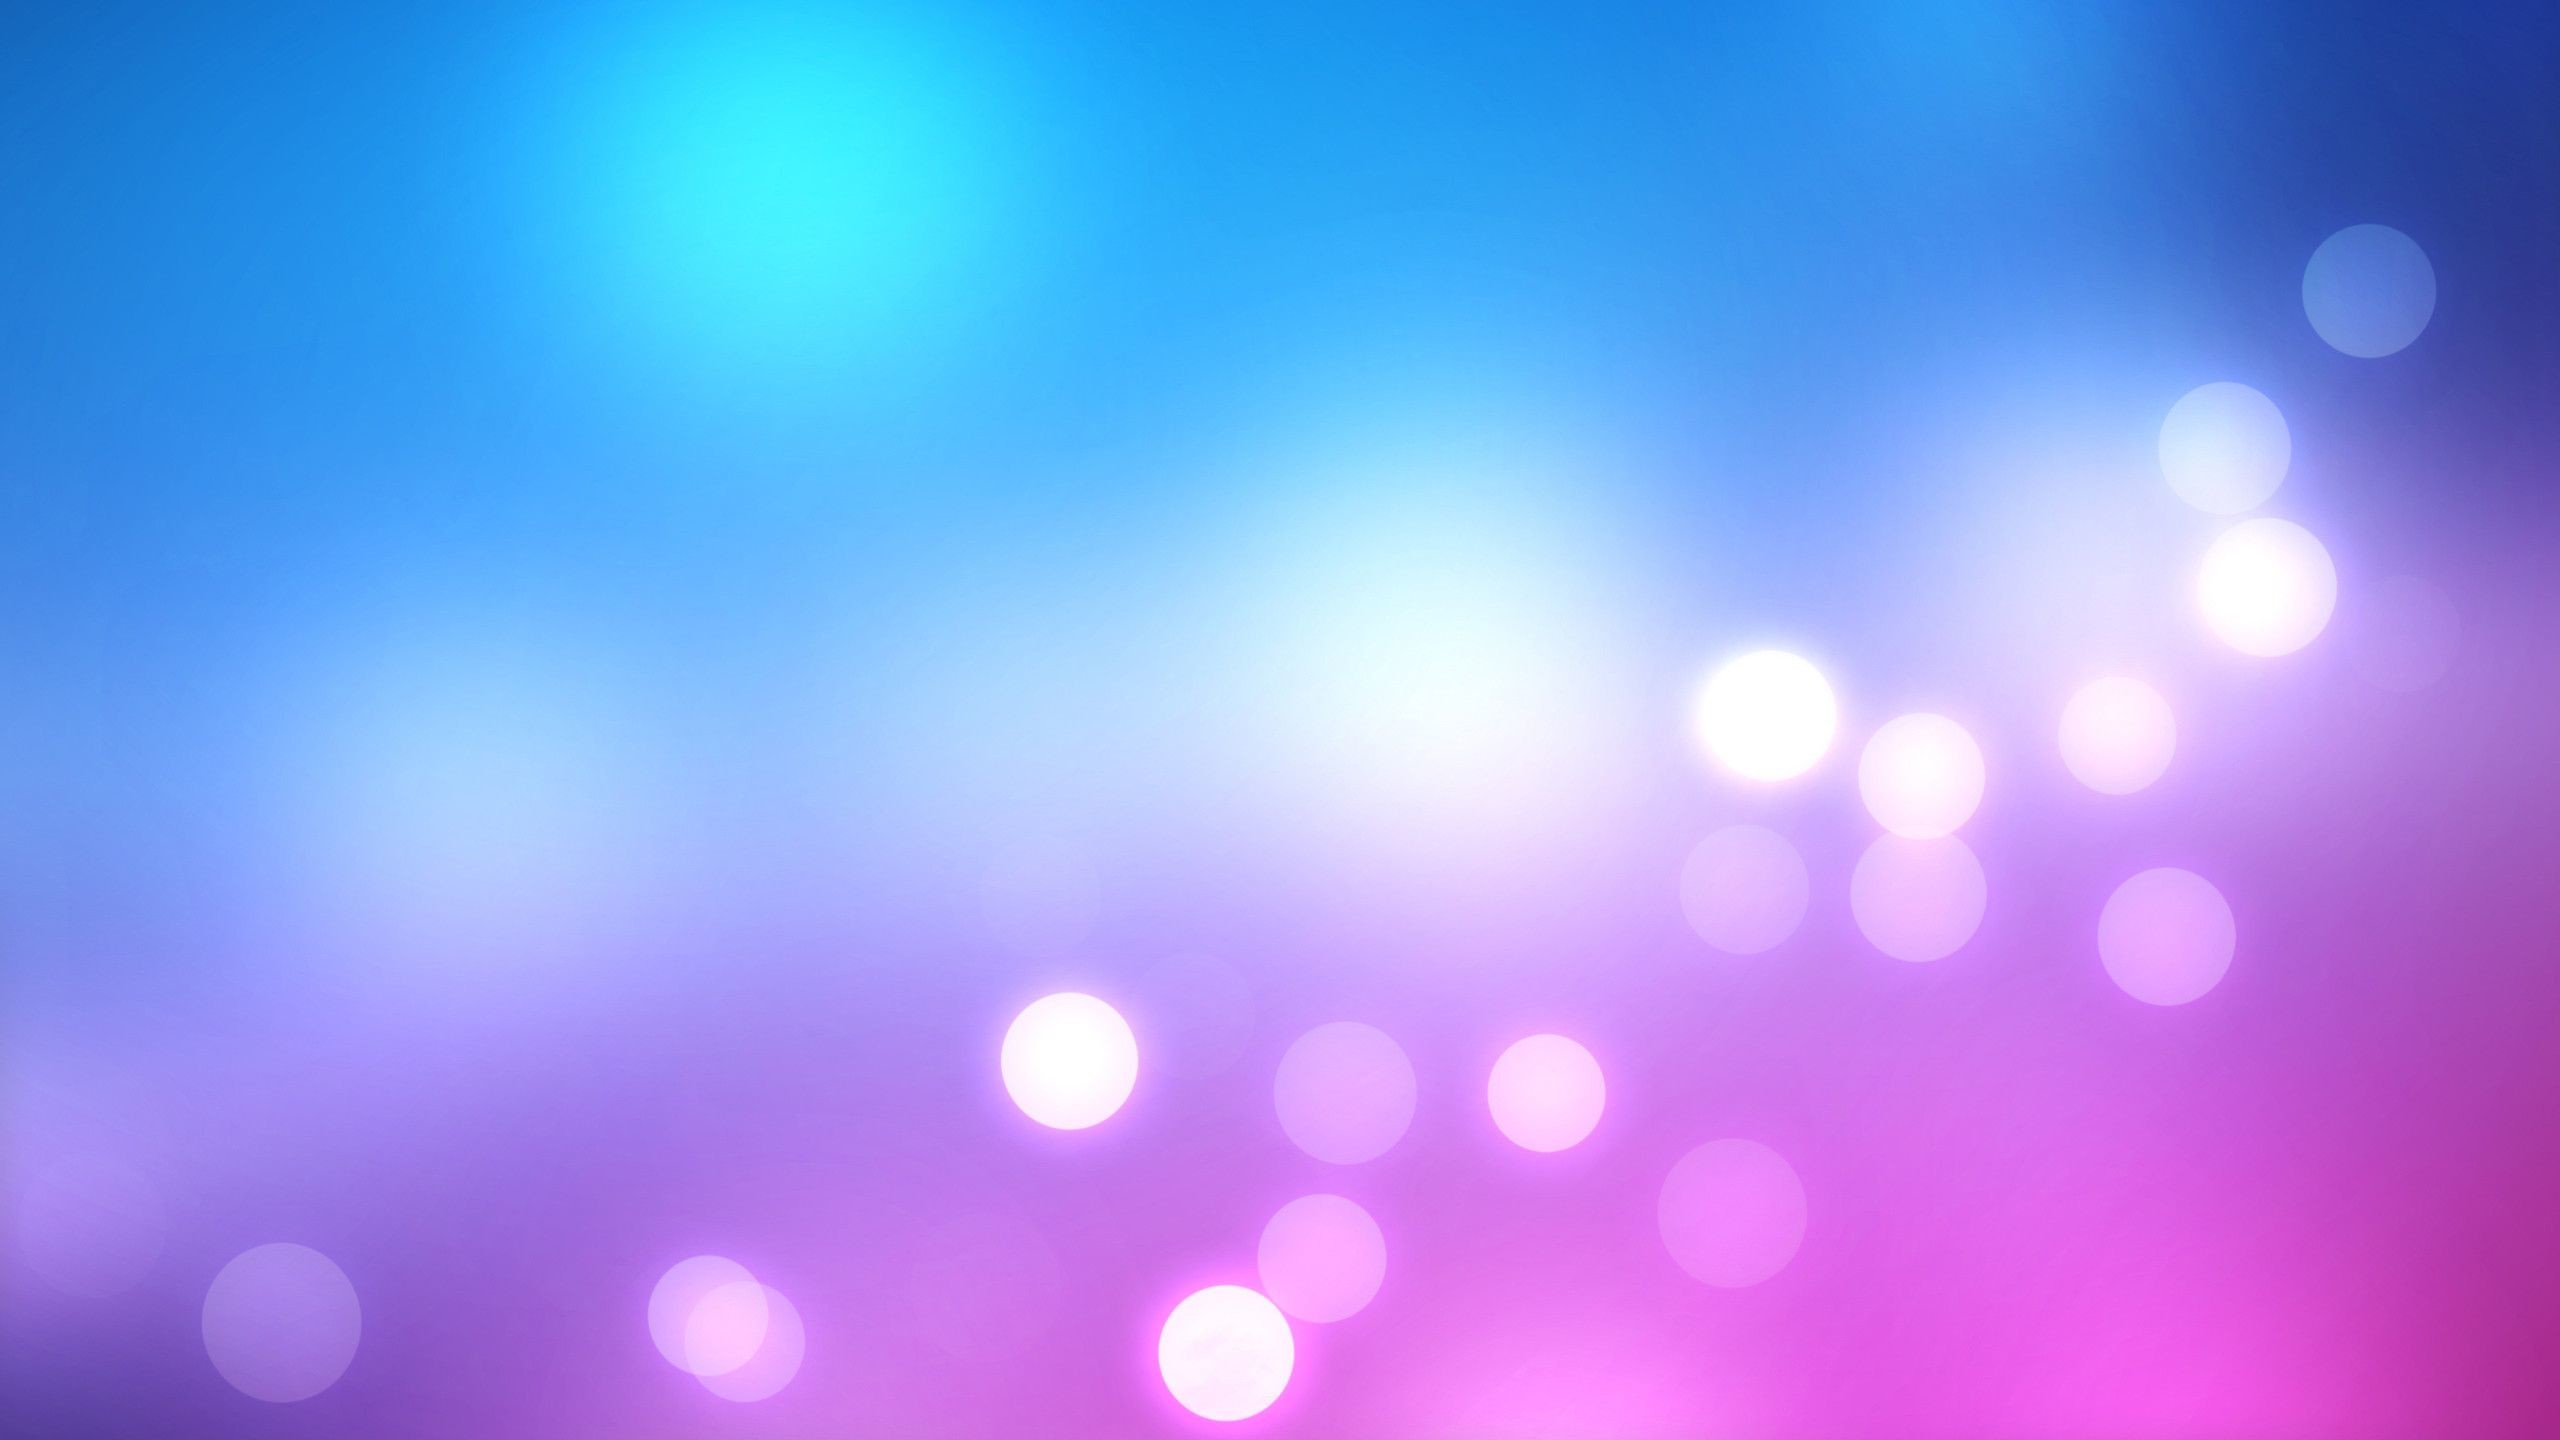 2560x1440 Search Results for “bright blue and purple wallpaper” – Adorable Wallpapers